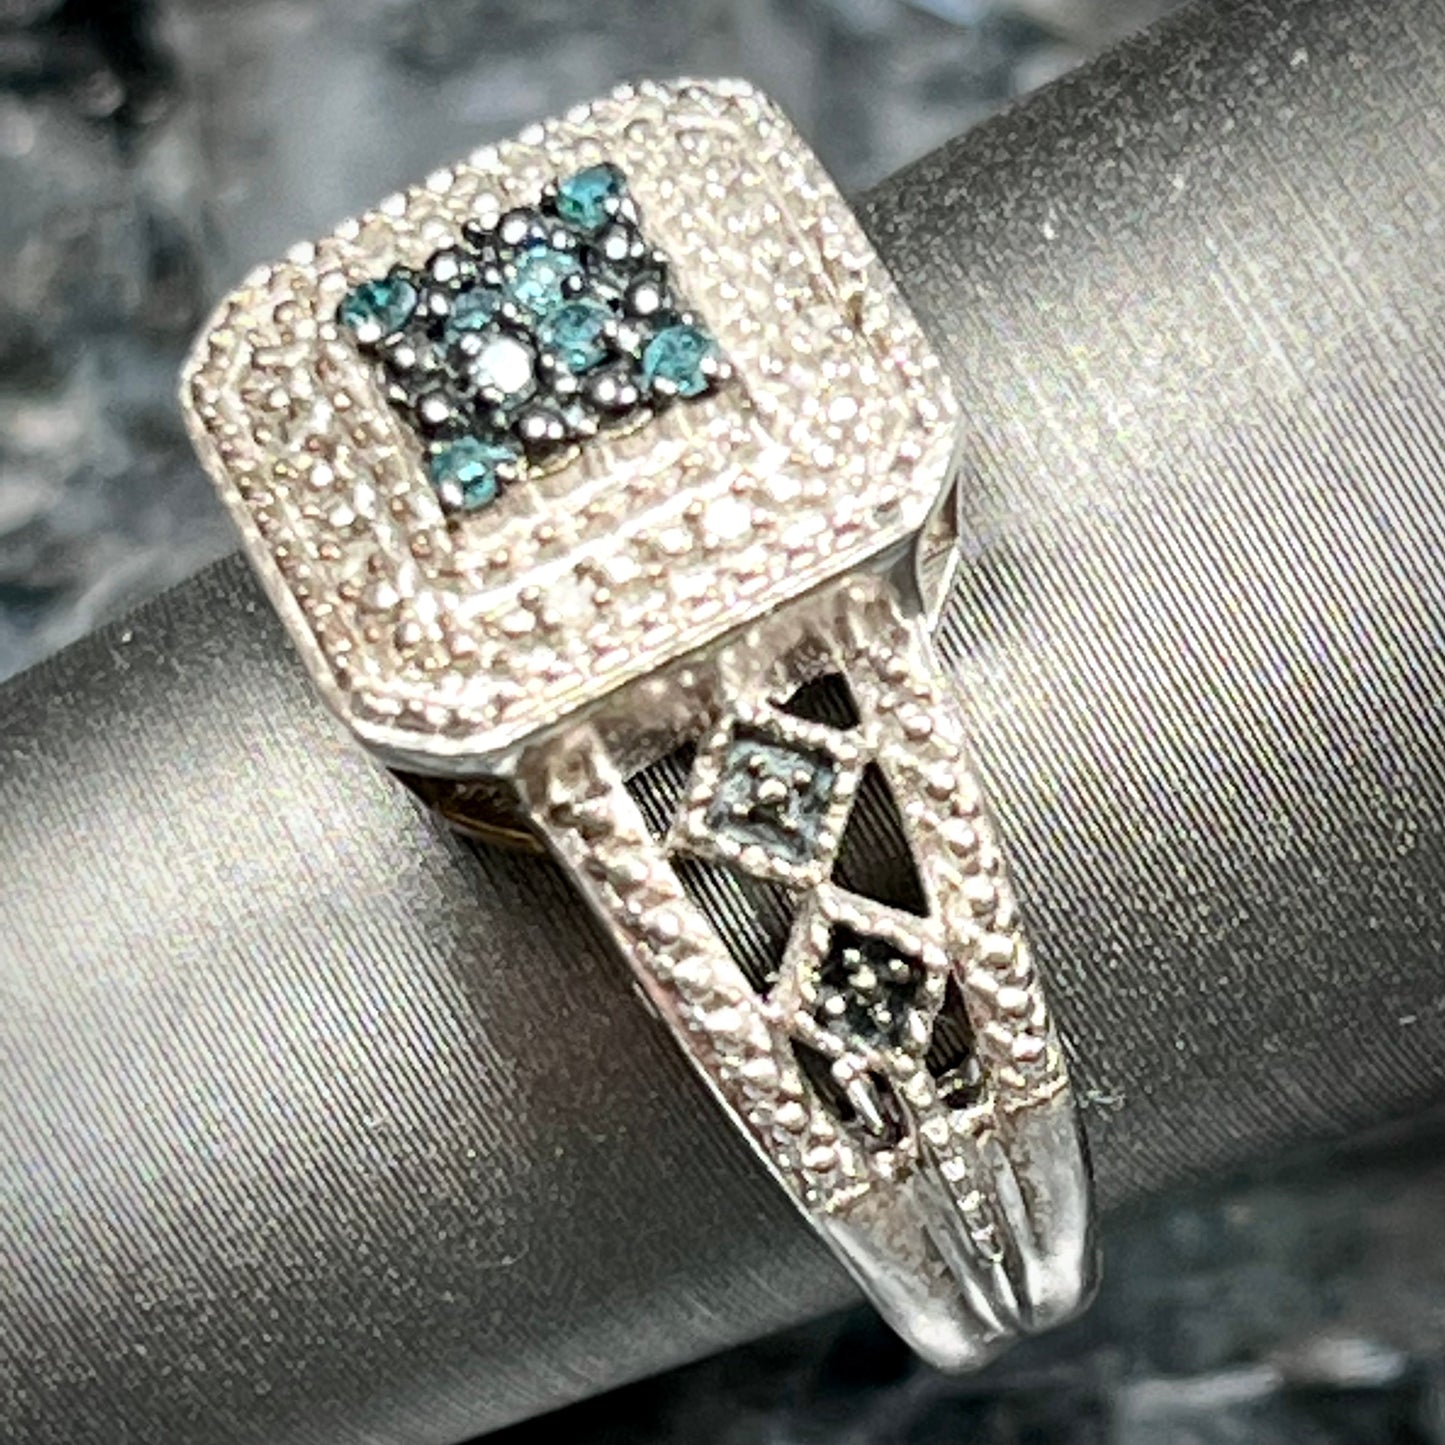 A sterling silver ring set with blue and white diamonds.